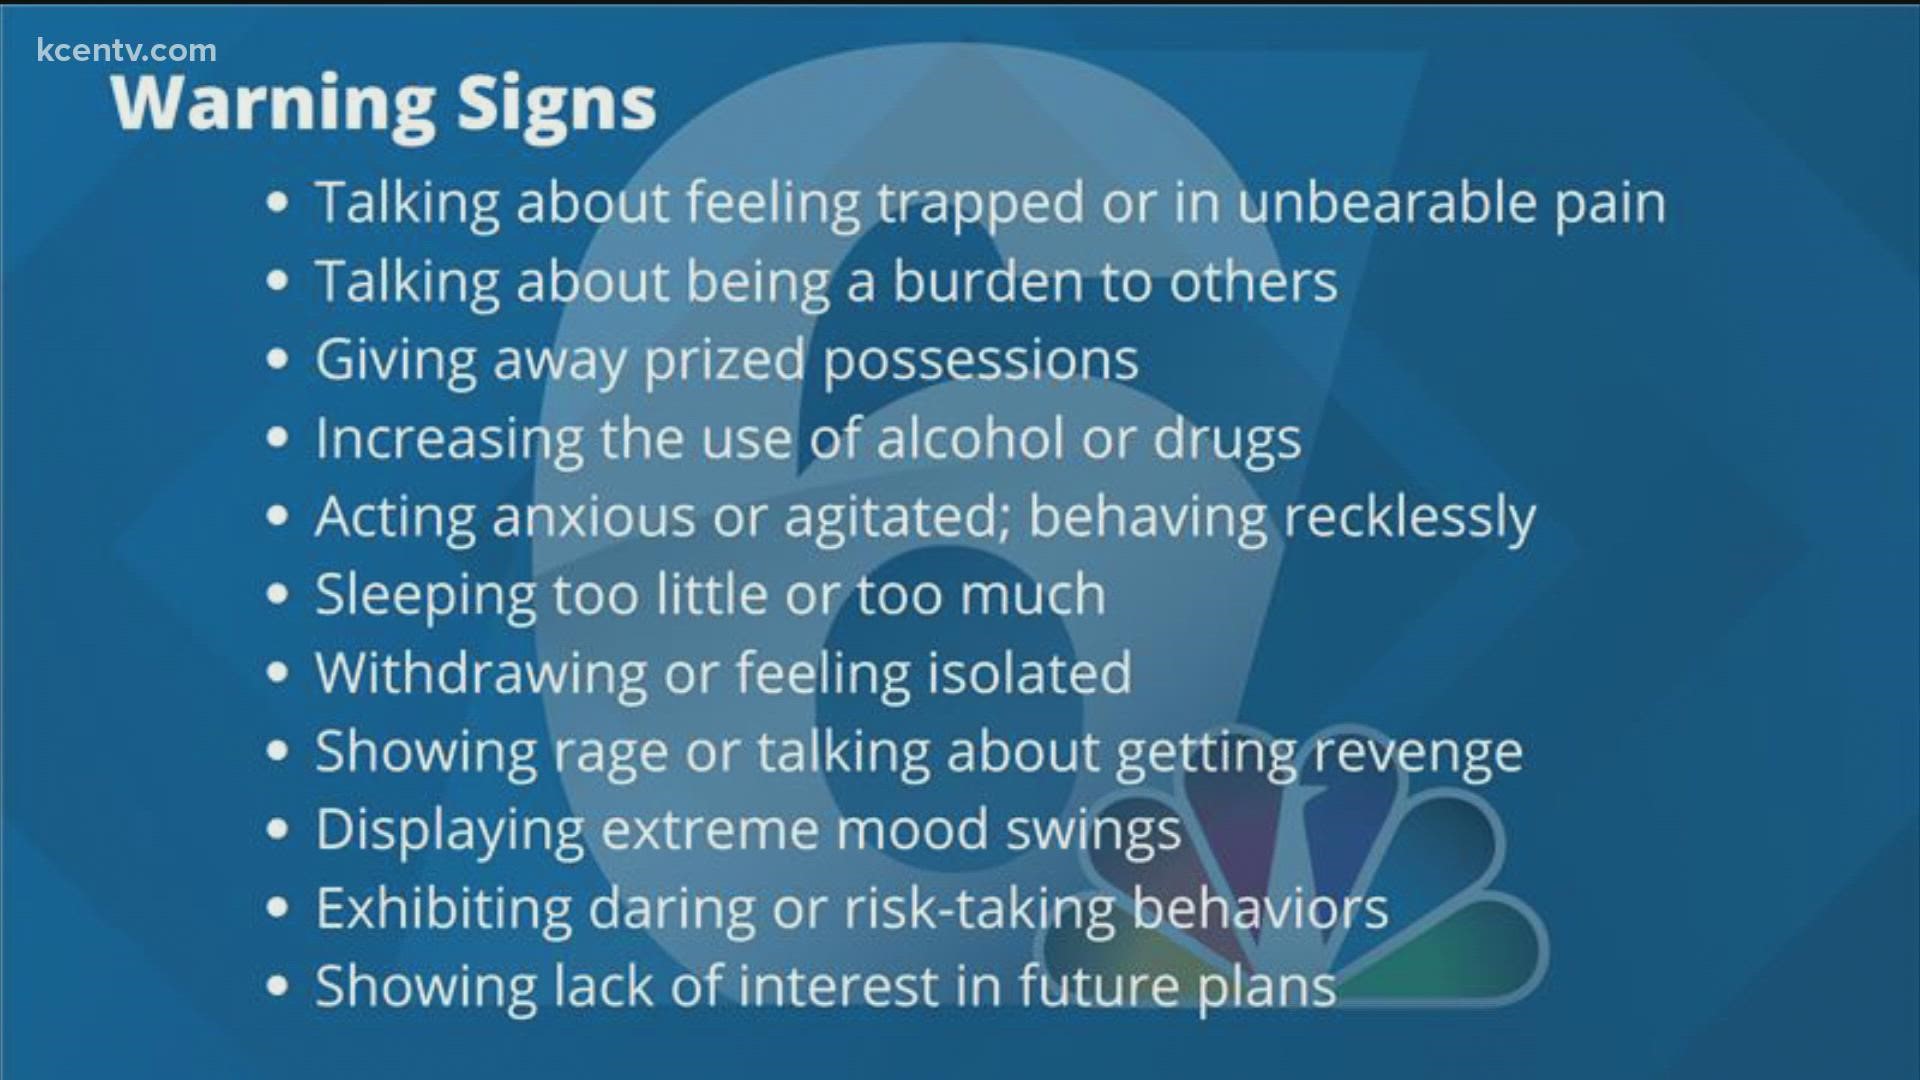 Family or fiends may not recognize the warning signs of a loved one contemplating suicide, 6News provides just a few signs during Suicide Awareness Month.